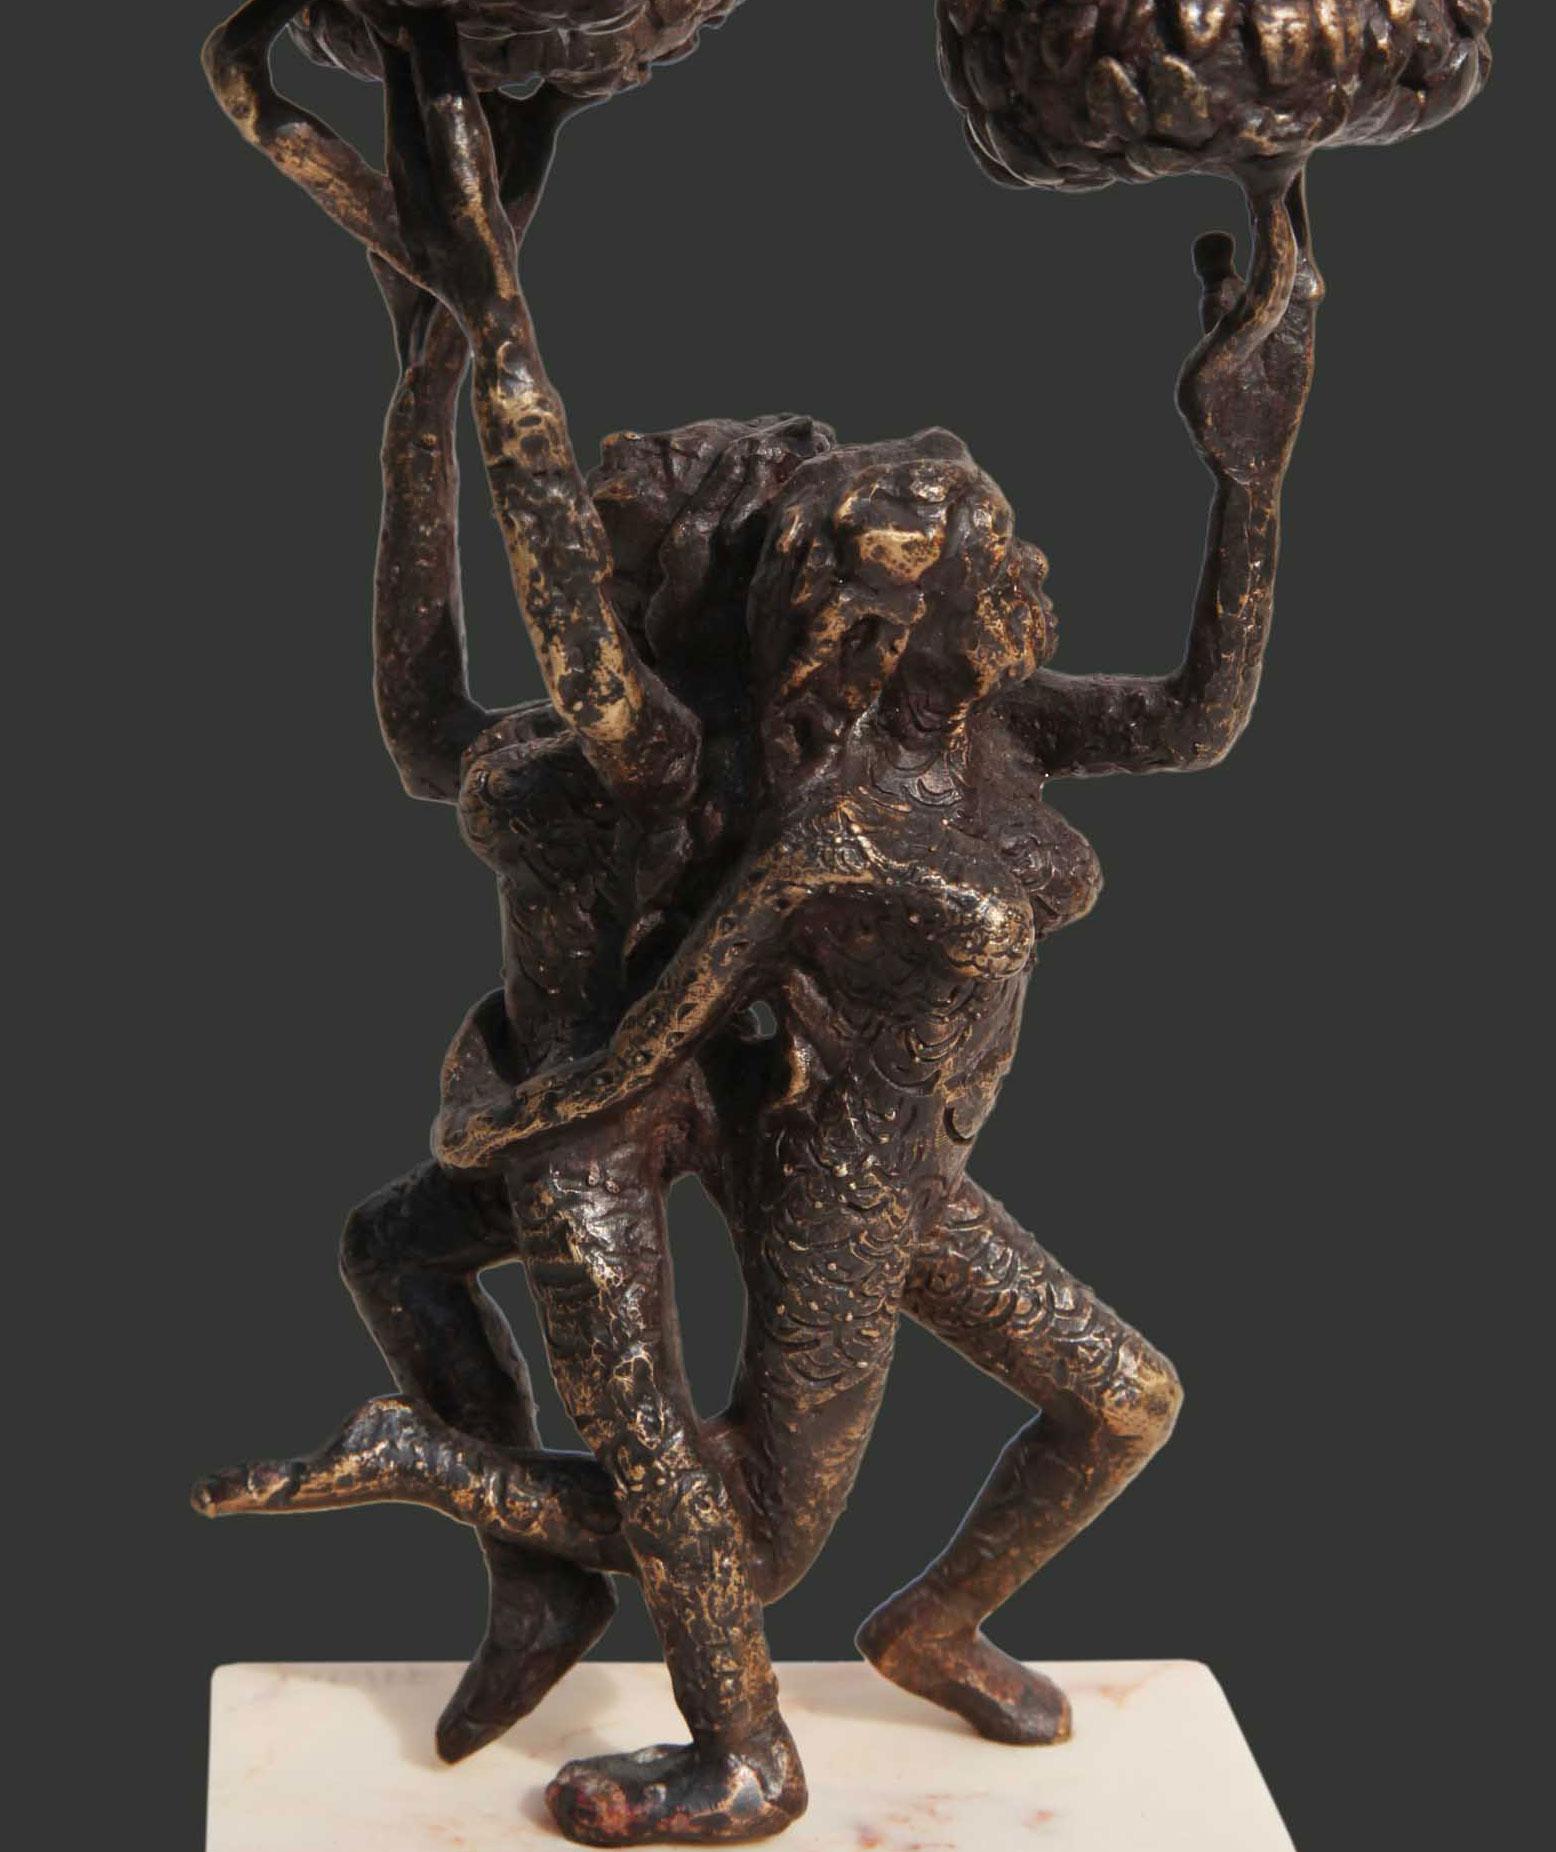 Seema Kohli - Untitled - H 8.5 x L 5.5 x W 4.5 inches
Small Bronze sculpture.

The Meticulous artist depicts the tree of life in her bronze small work. 
This could look beautiful in your study Table or perched on your various interesting Coffee